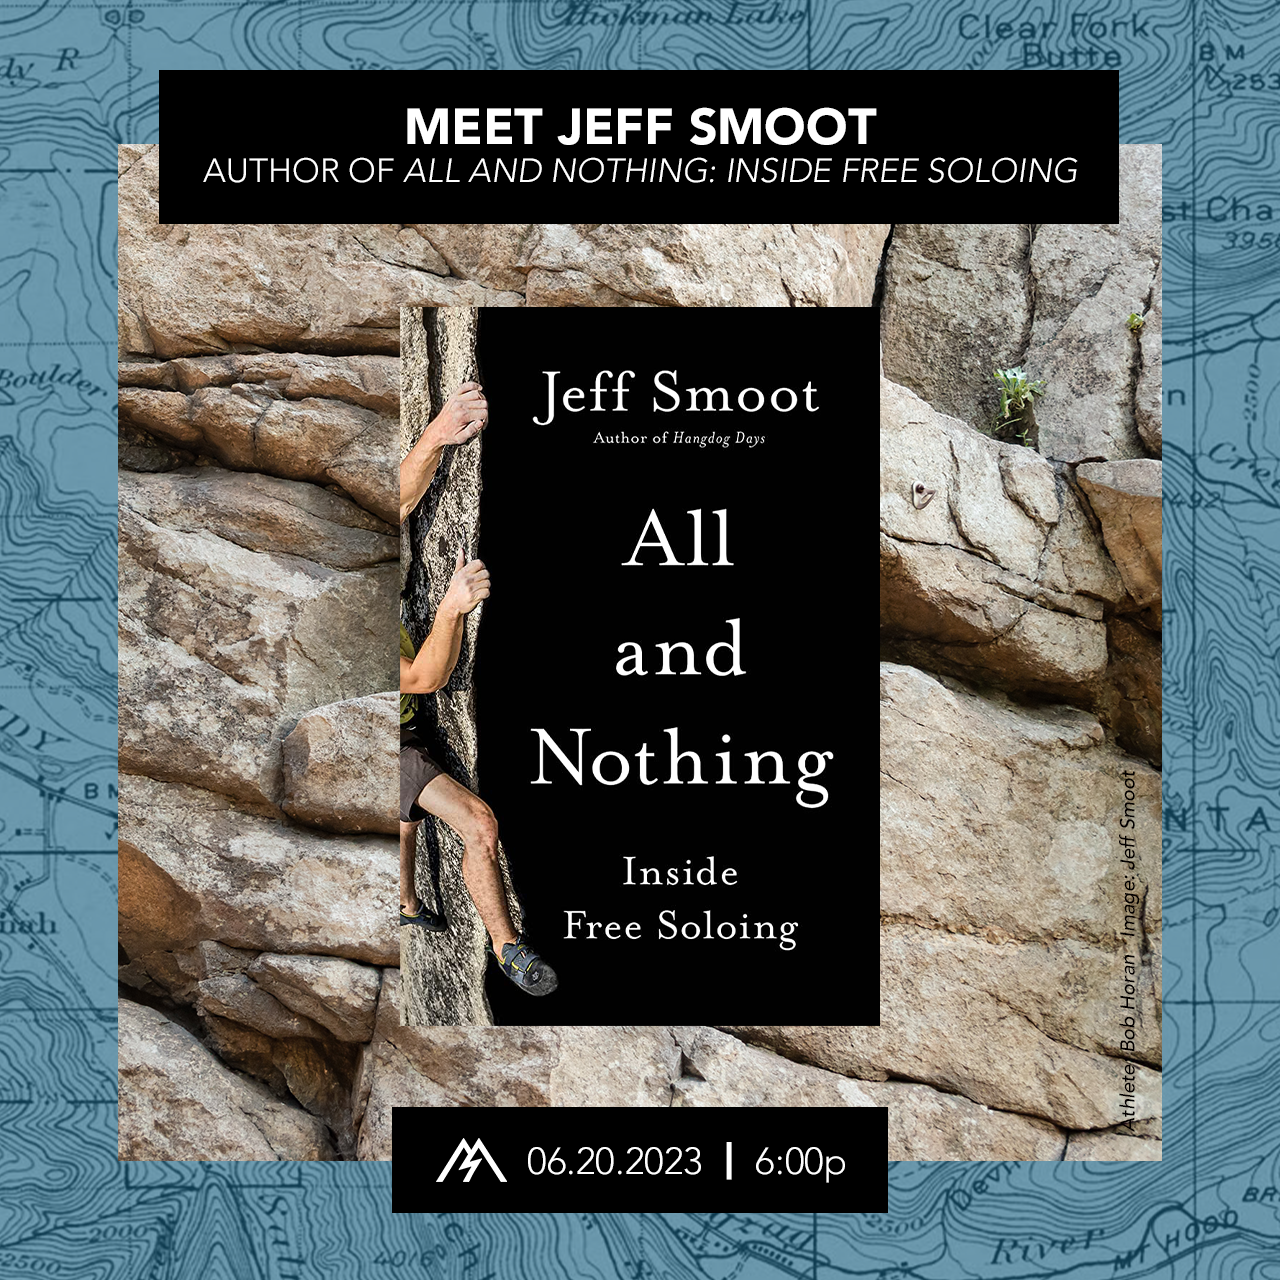 Meet Jeff Smoot, Author of All and Nothing: Inside Free Soloing